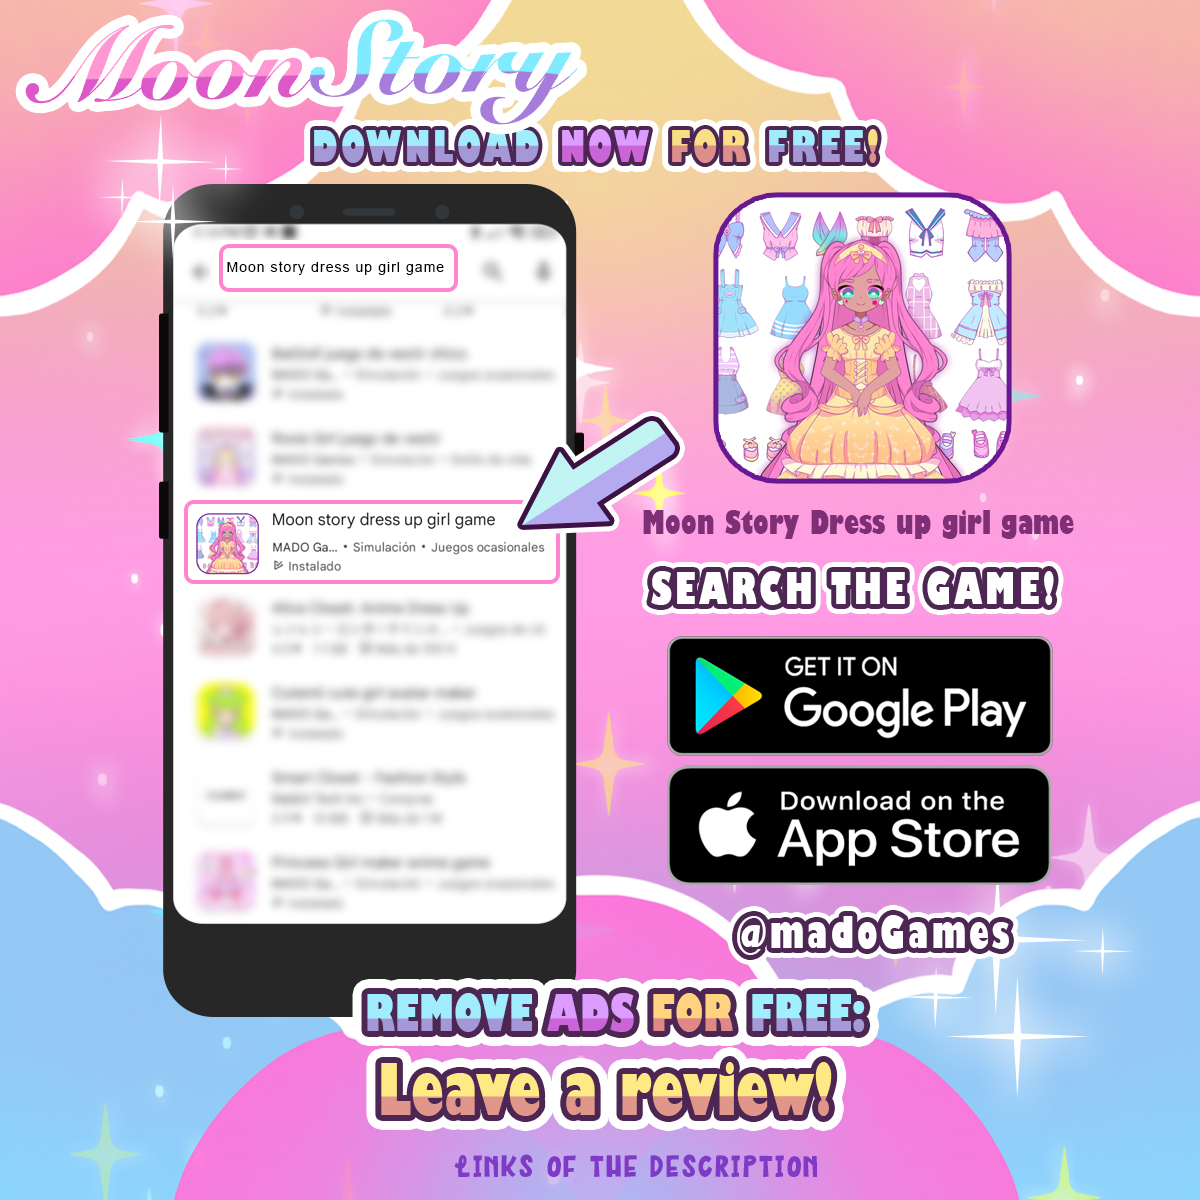 Post by Lyne! in Gacha Cute Android comments 